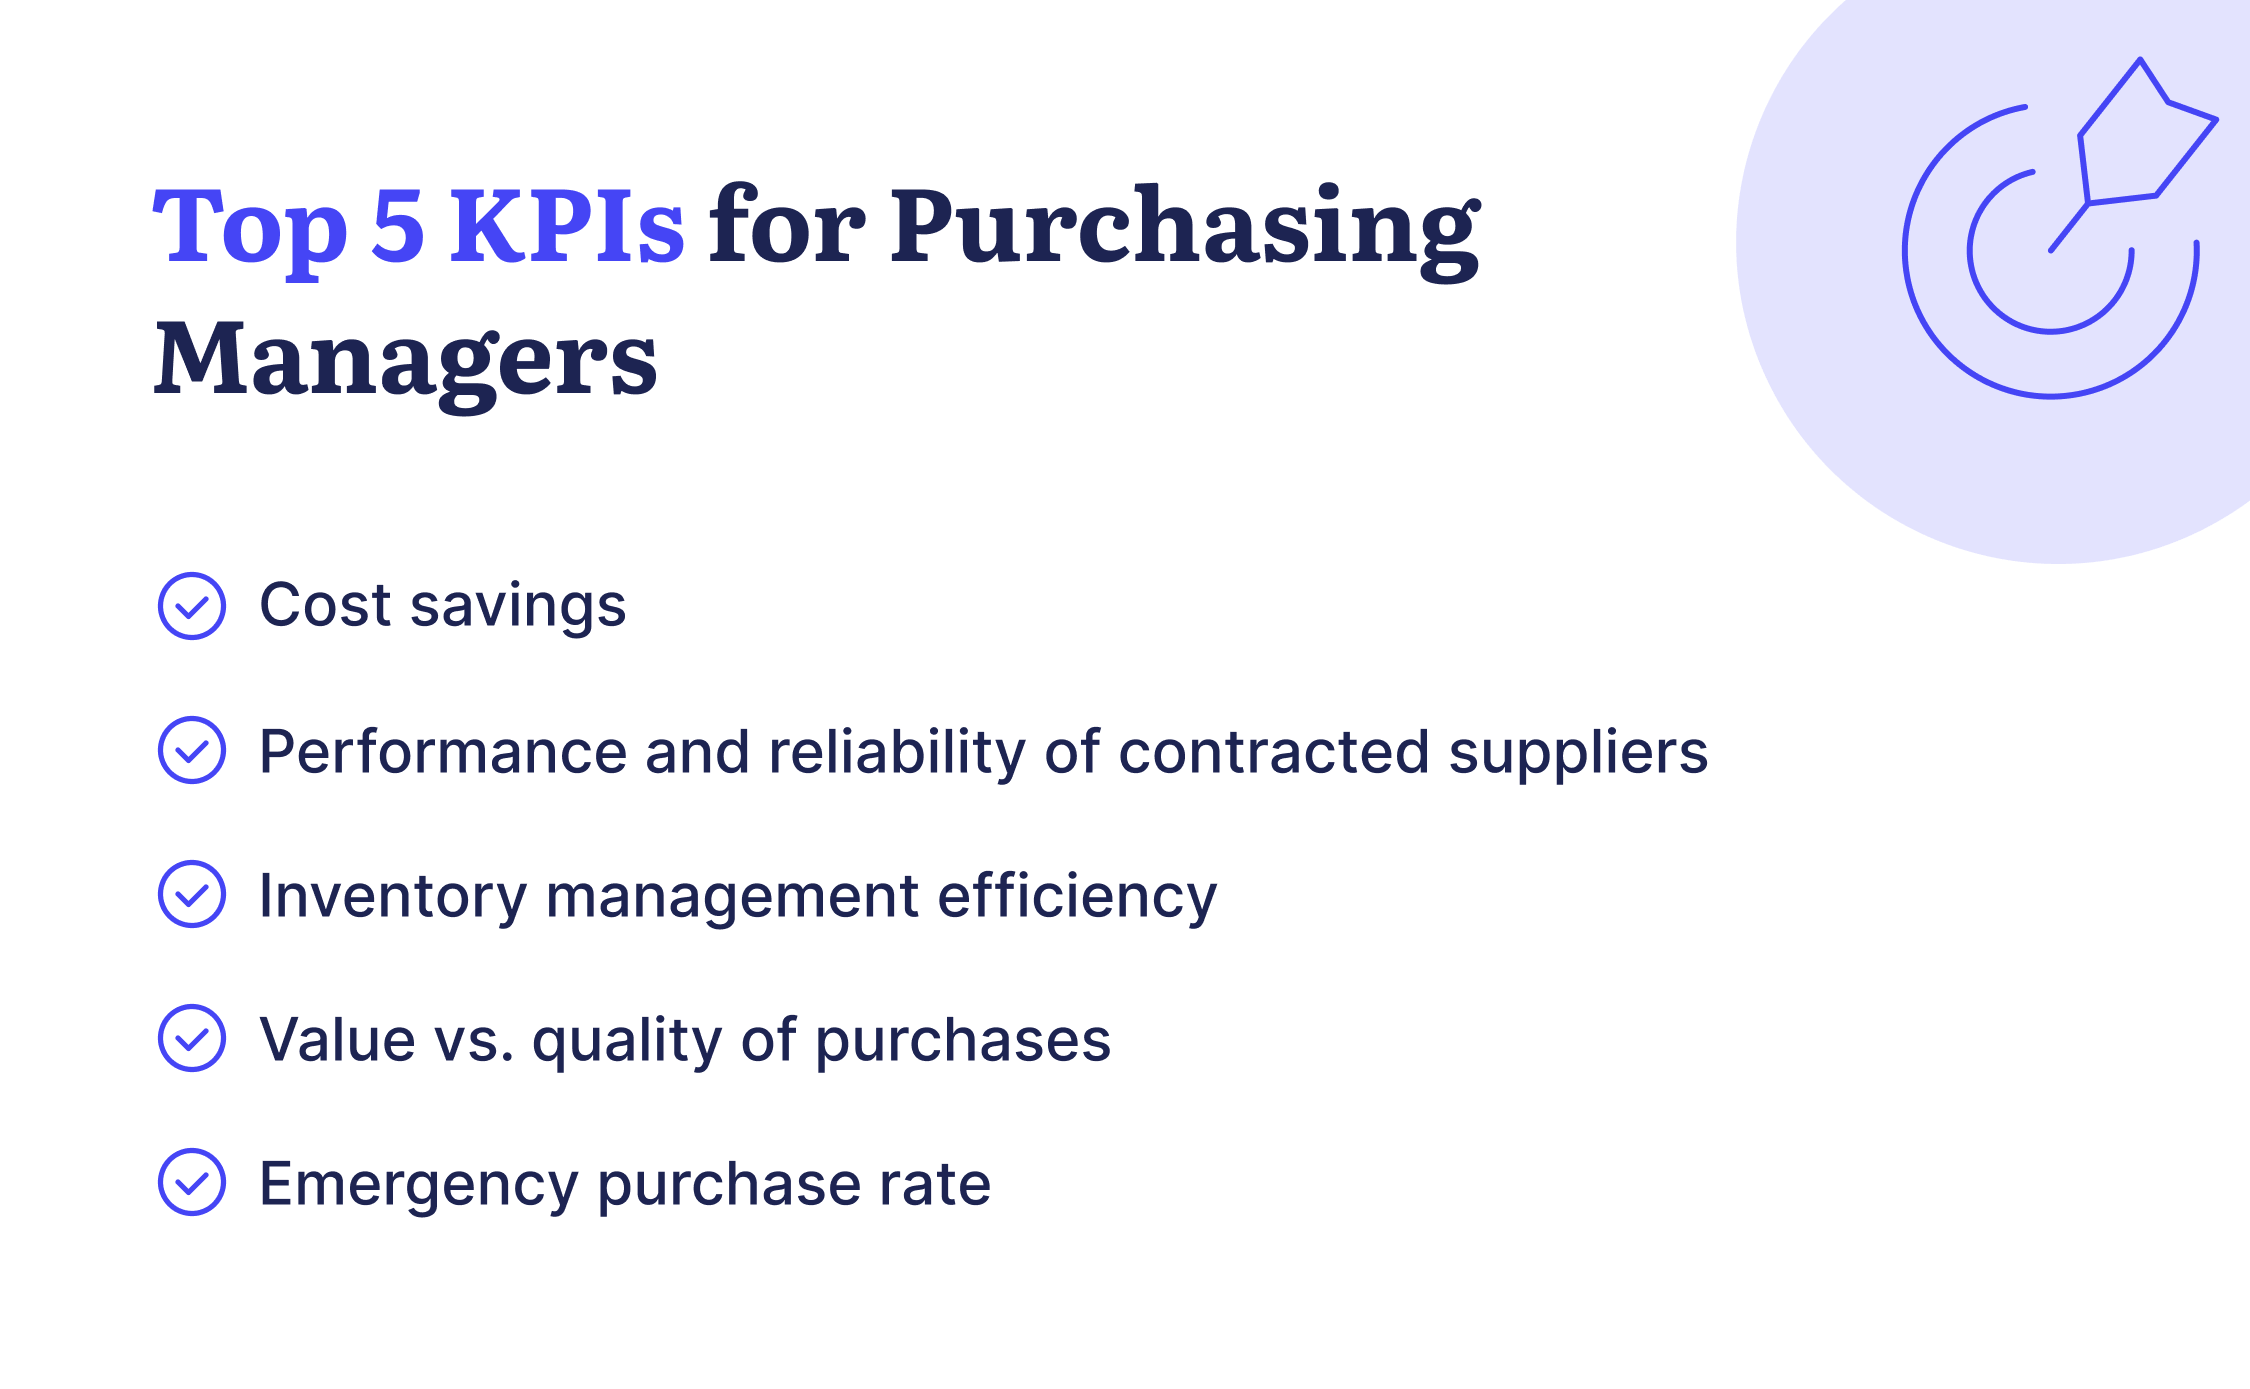 list of top 5 kpis for purchasing managers